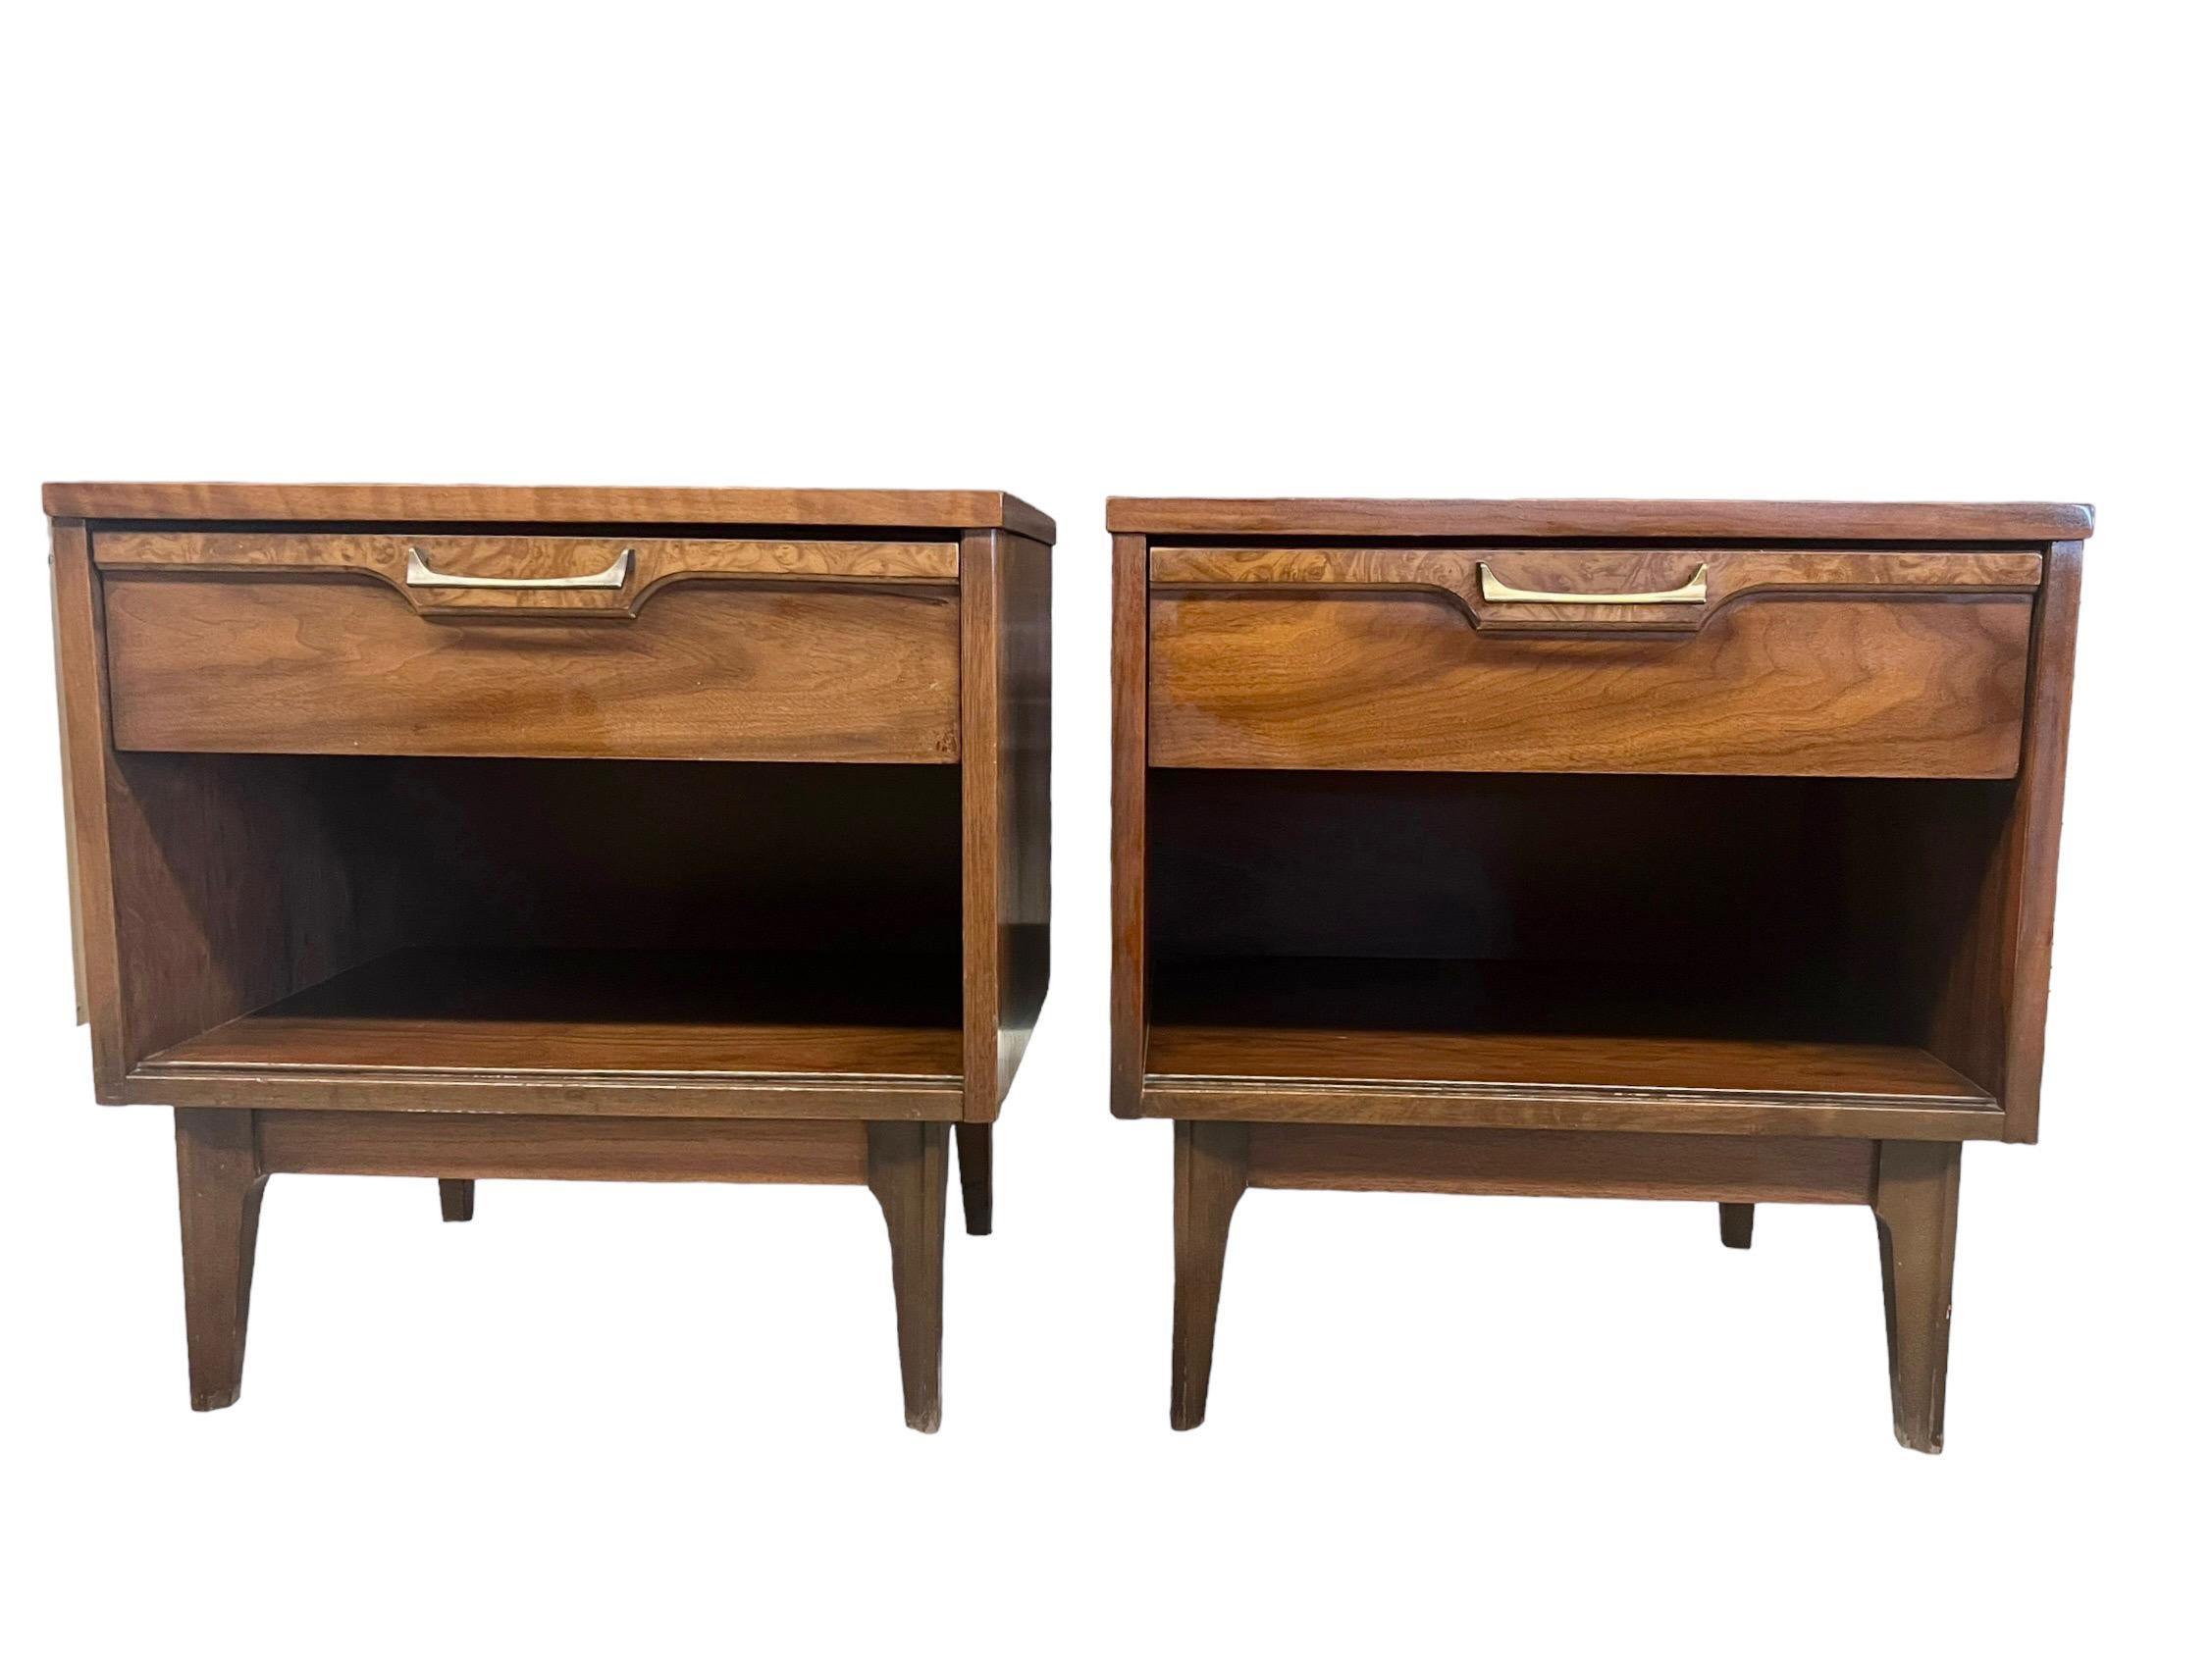 A Pair of Century Modern Walnut Single Drawer Night Stands with Brass Drawer Pulls and a Lower Compartment and Burl Accents 

Dimensions. 22 W ; 15 D; 23 H